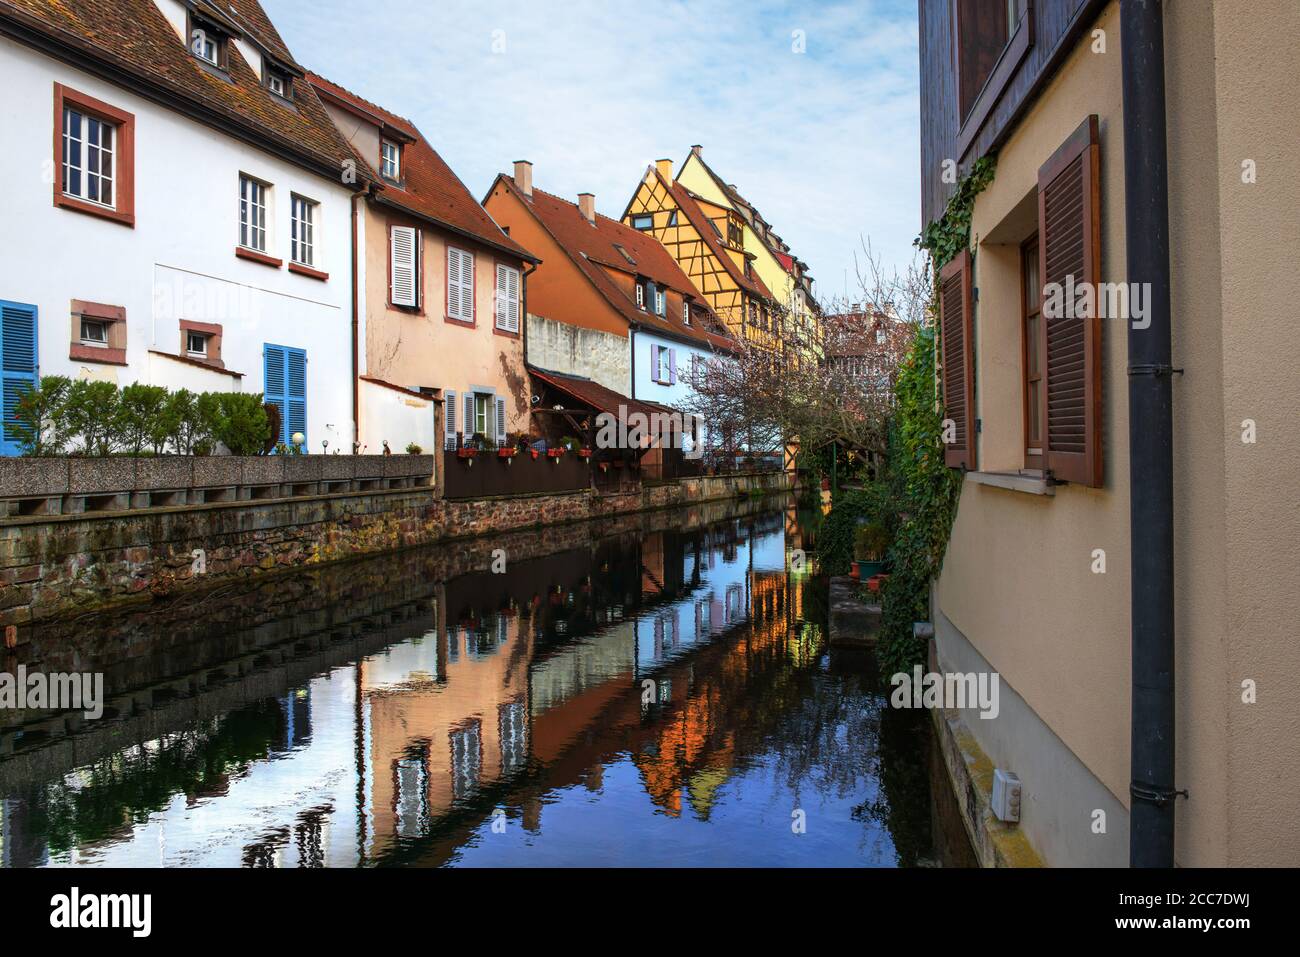 A beautiful view of buildings in the historic town of Colmar, in Alsace, France Stock Photo